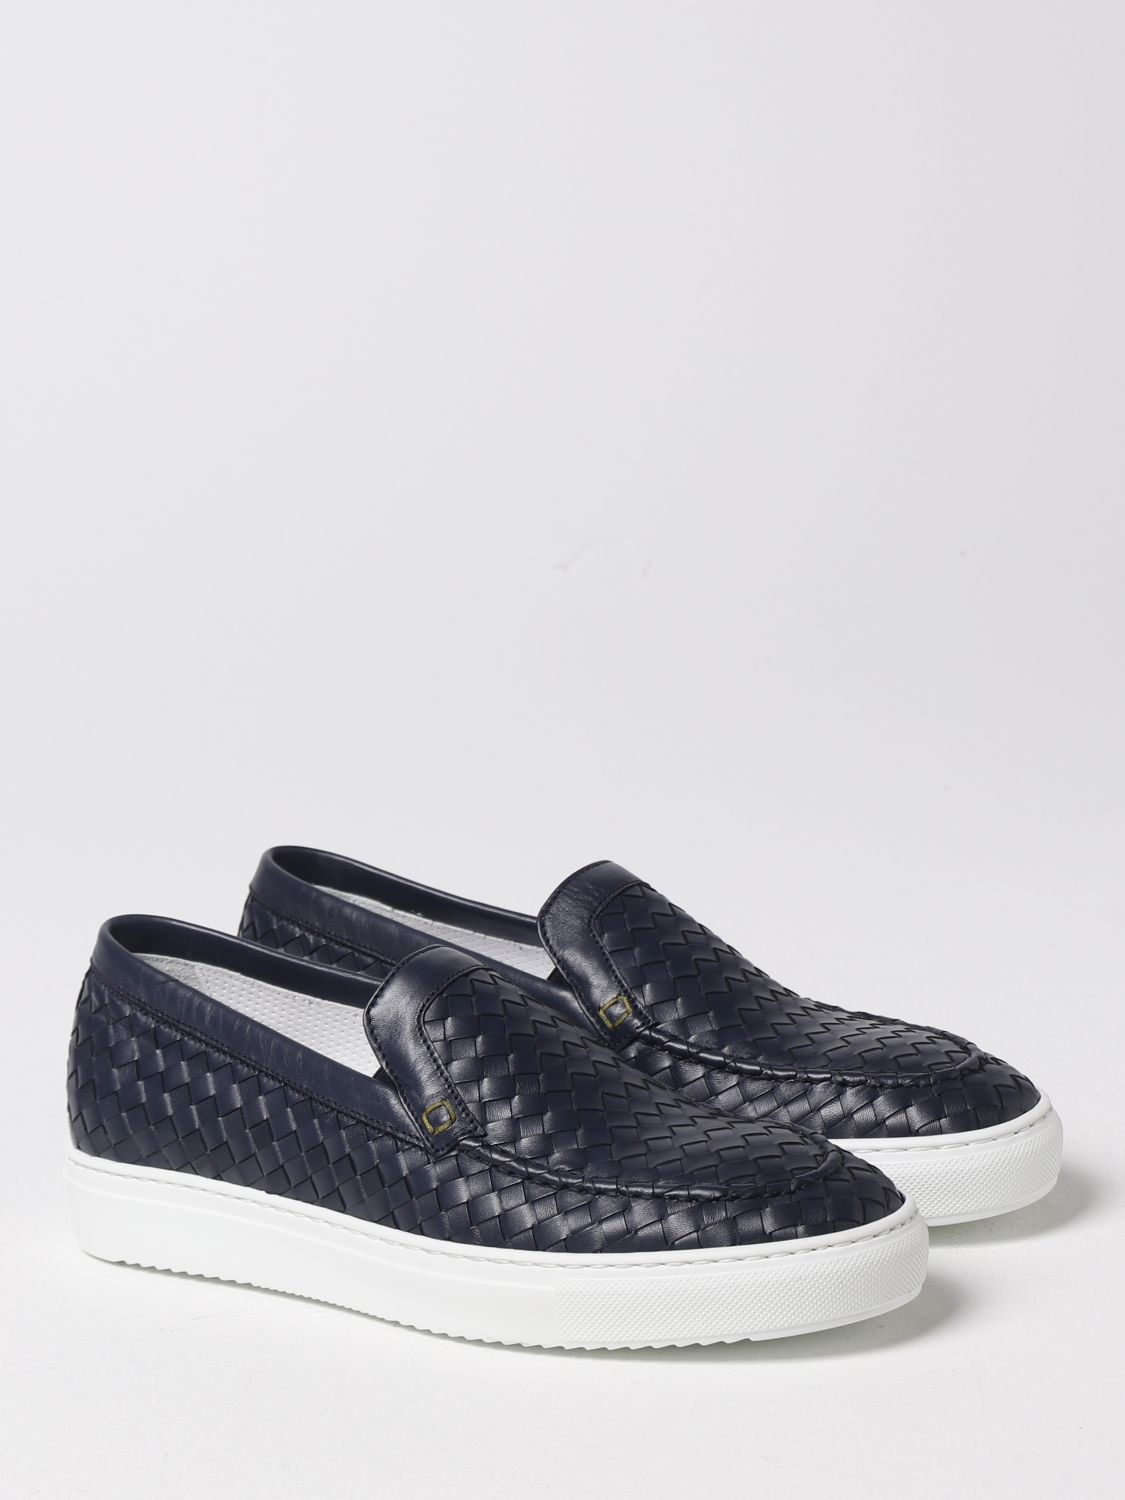 Loafers Doucal's: Doucal's loafers for men blue 2